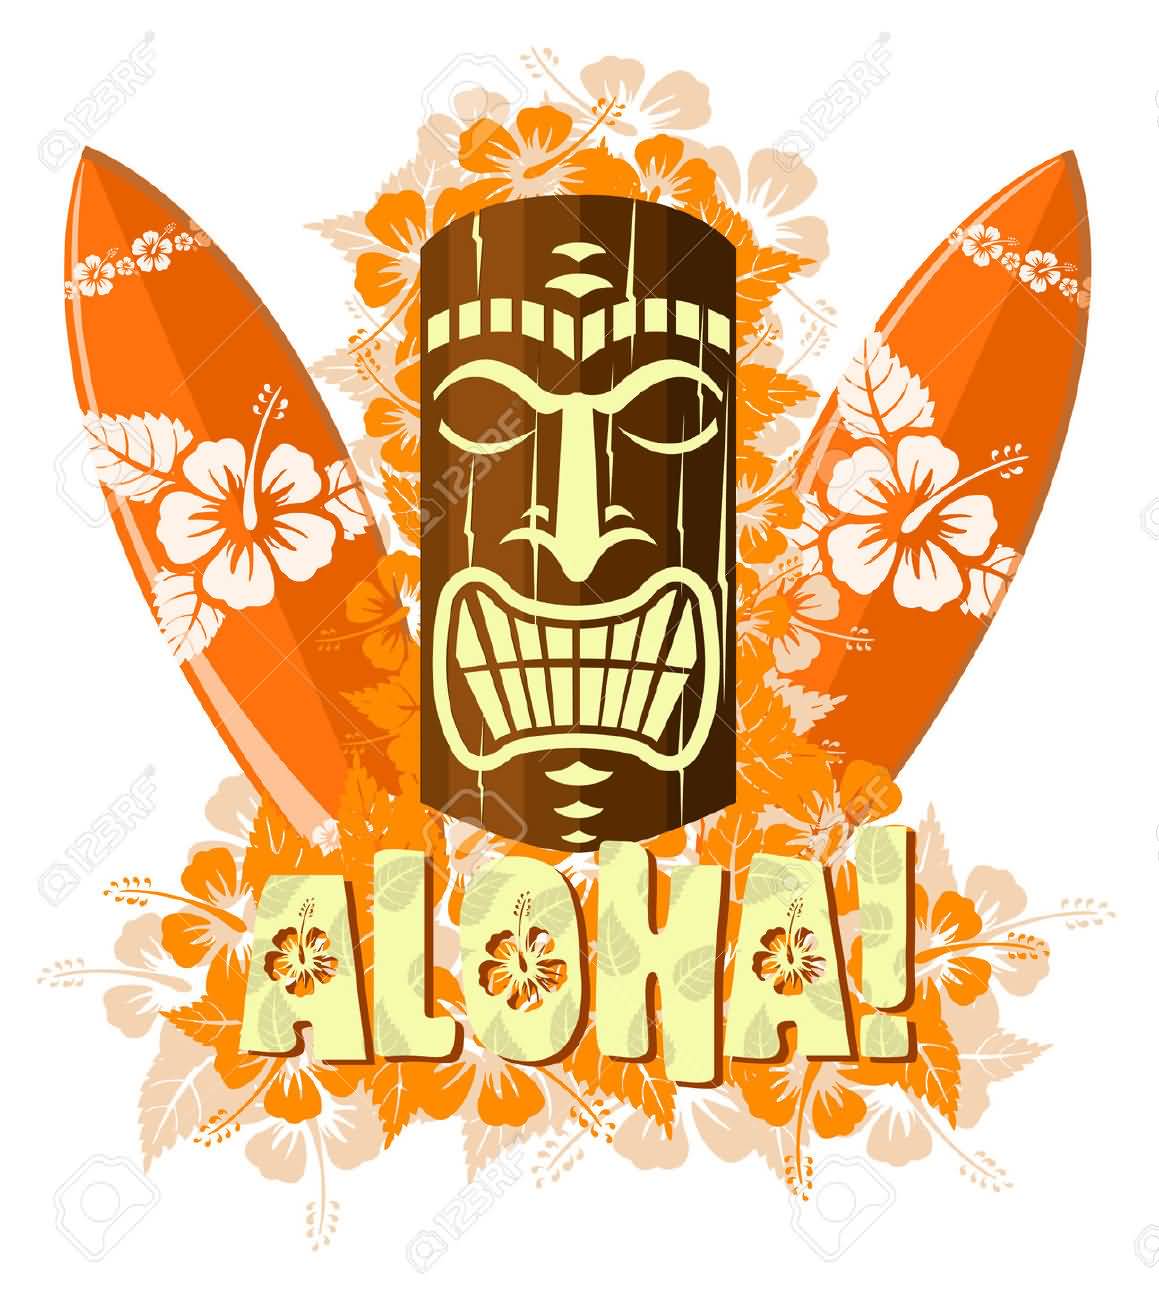 Aloha Tiki Mask And Surfboards Picture